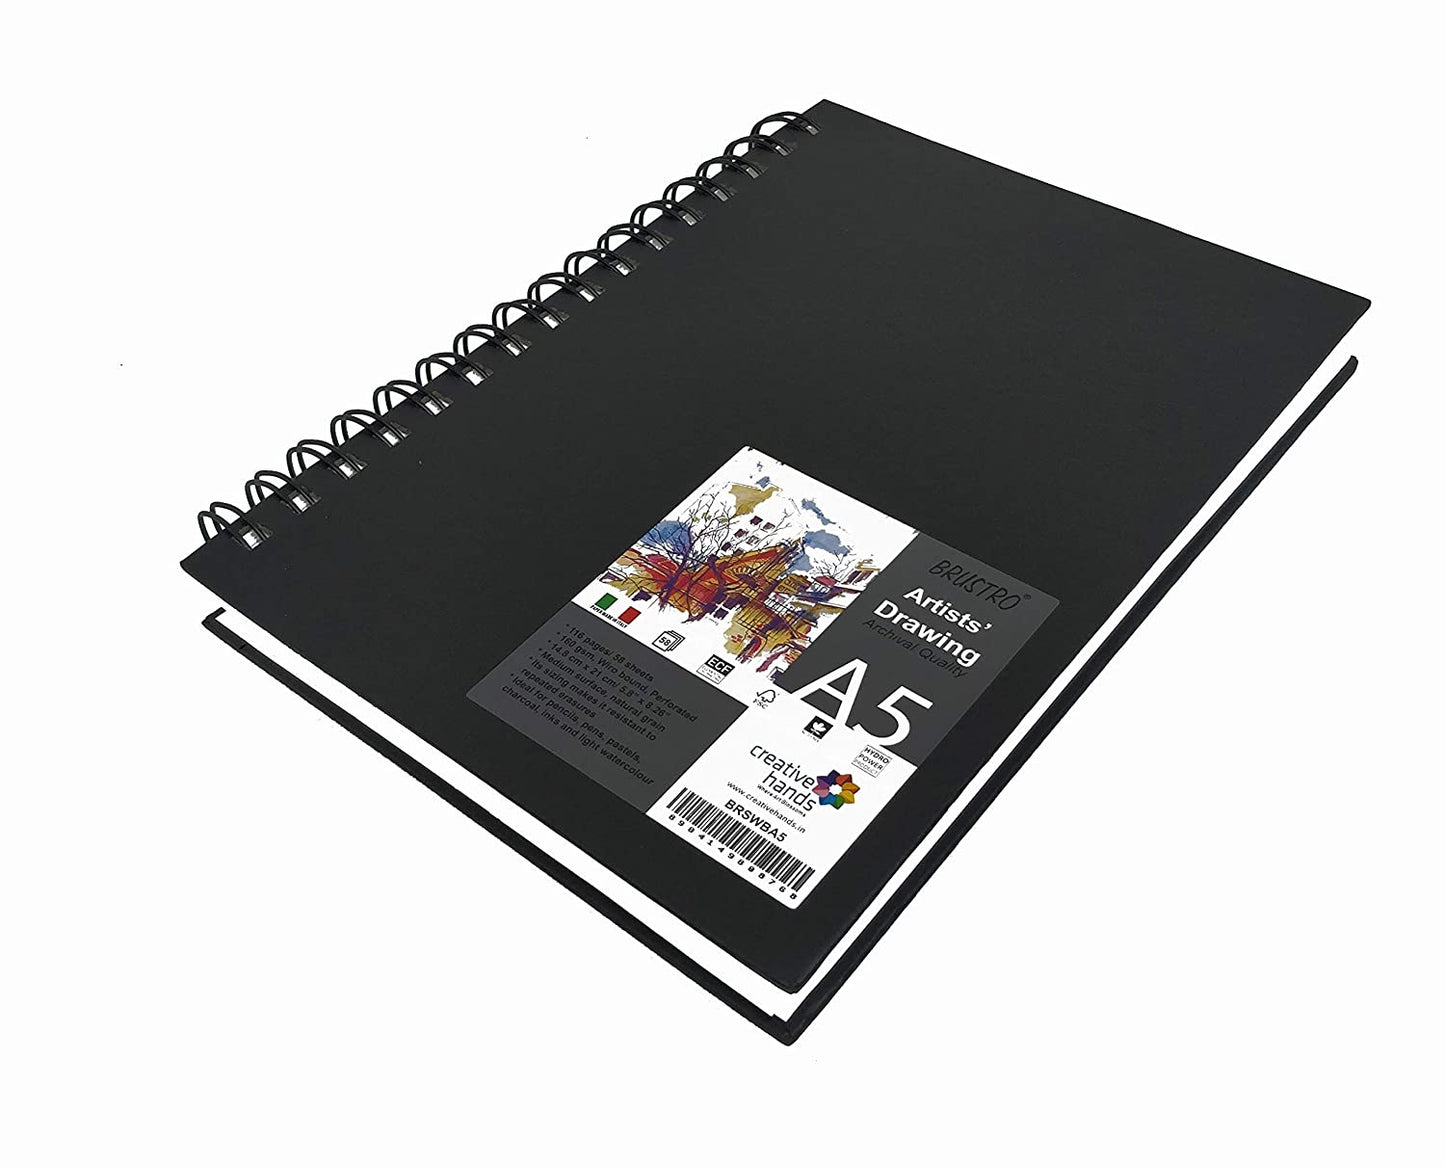 Brustro Artists Sketch Book Wiro Bound A5 Size ( 14.8 CM x 21 CM ), 116 Pages,160 GSM (Acid Free)